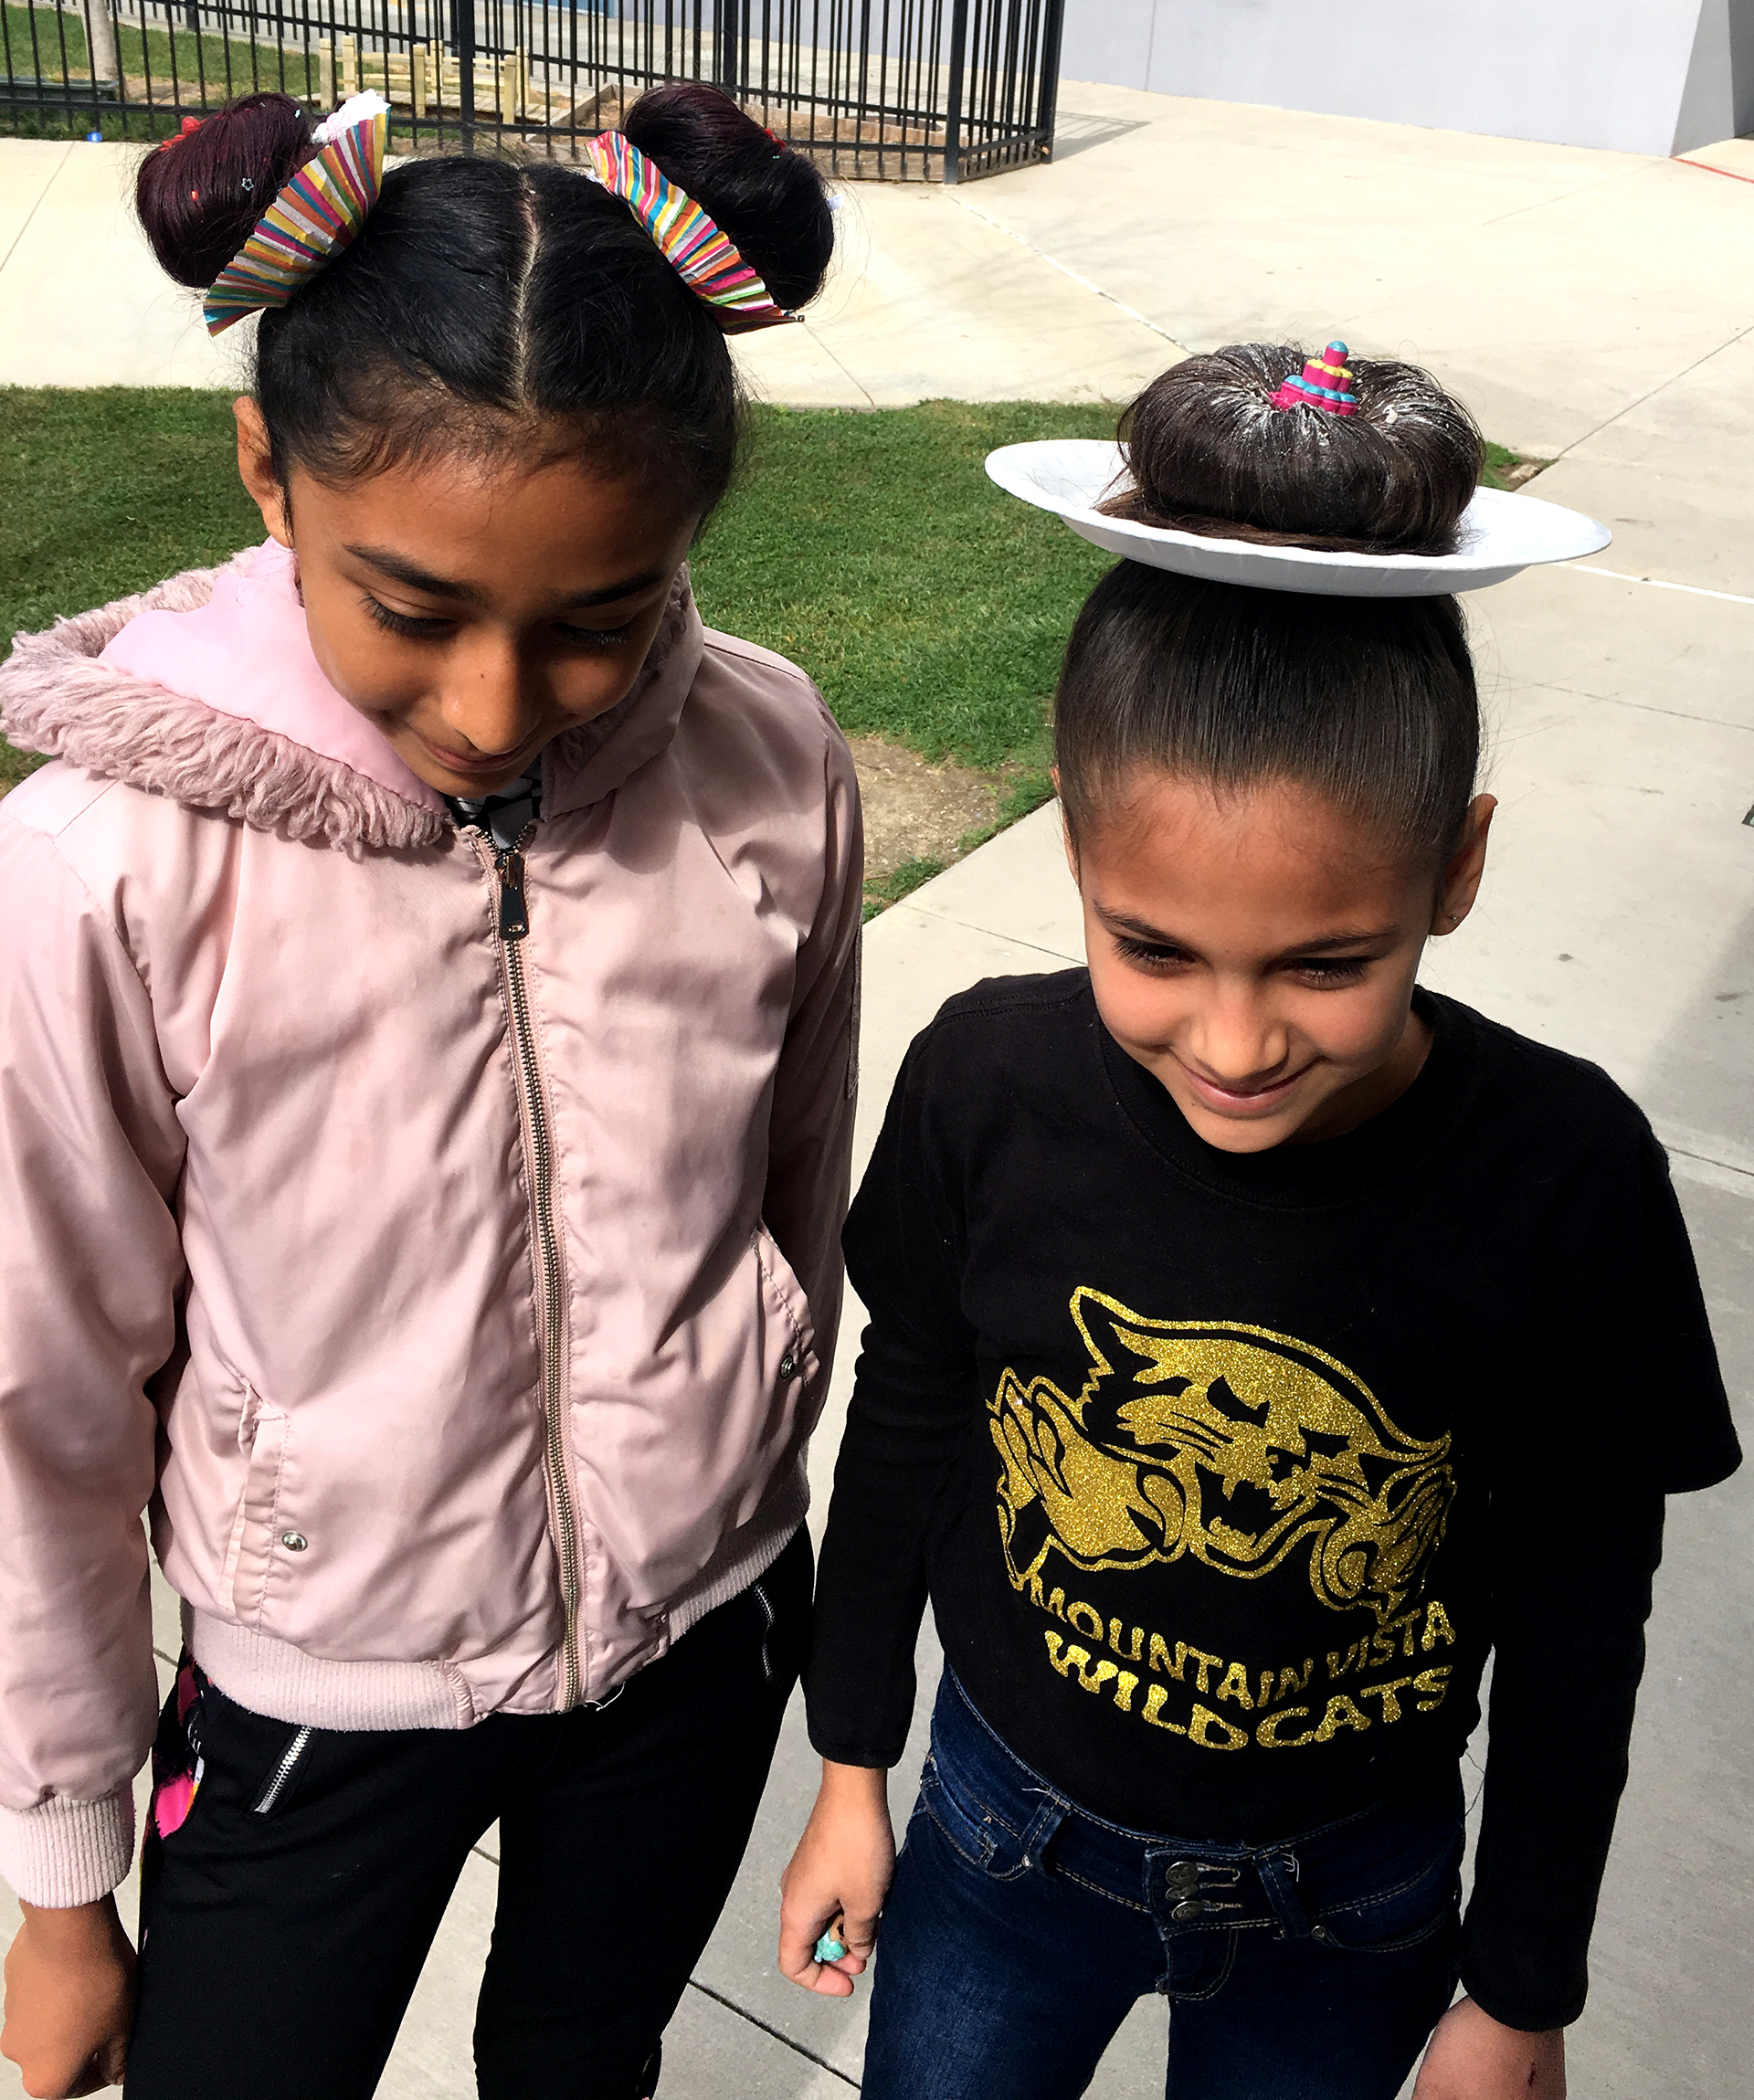 Crazy Hair Day! — Fillmore Unified School District